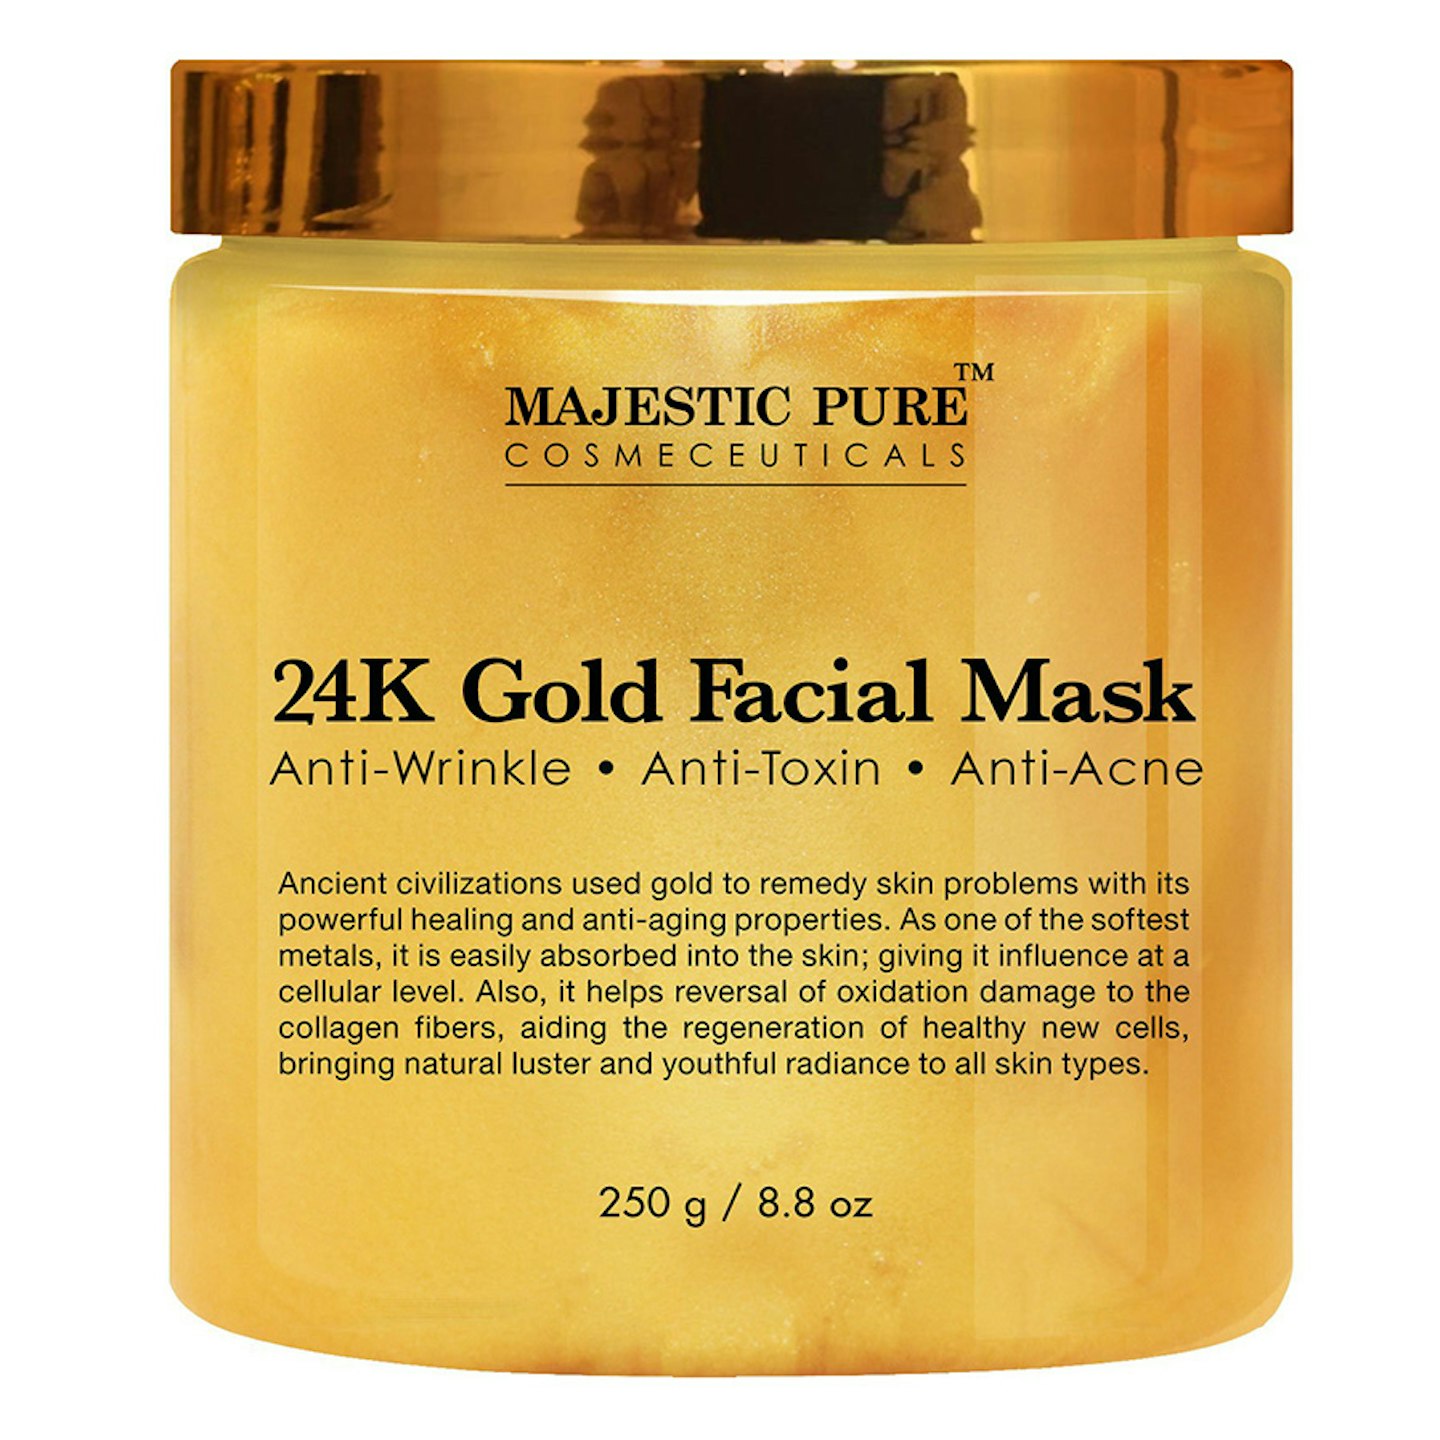 Majestic Pure Cosmeceuticals 24K Gold Facial Mask